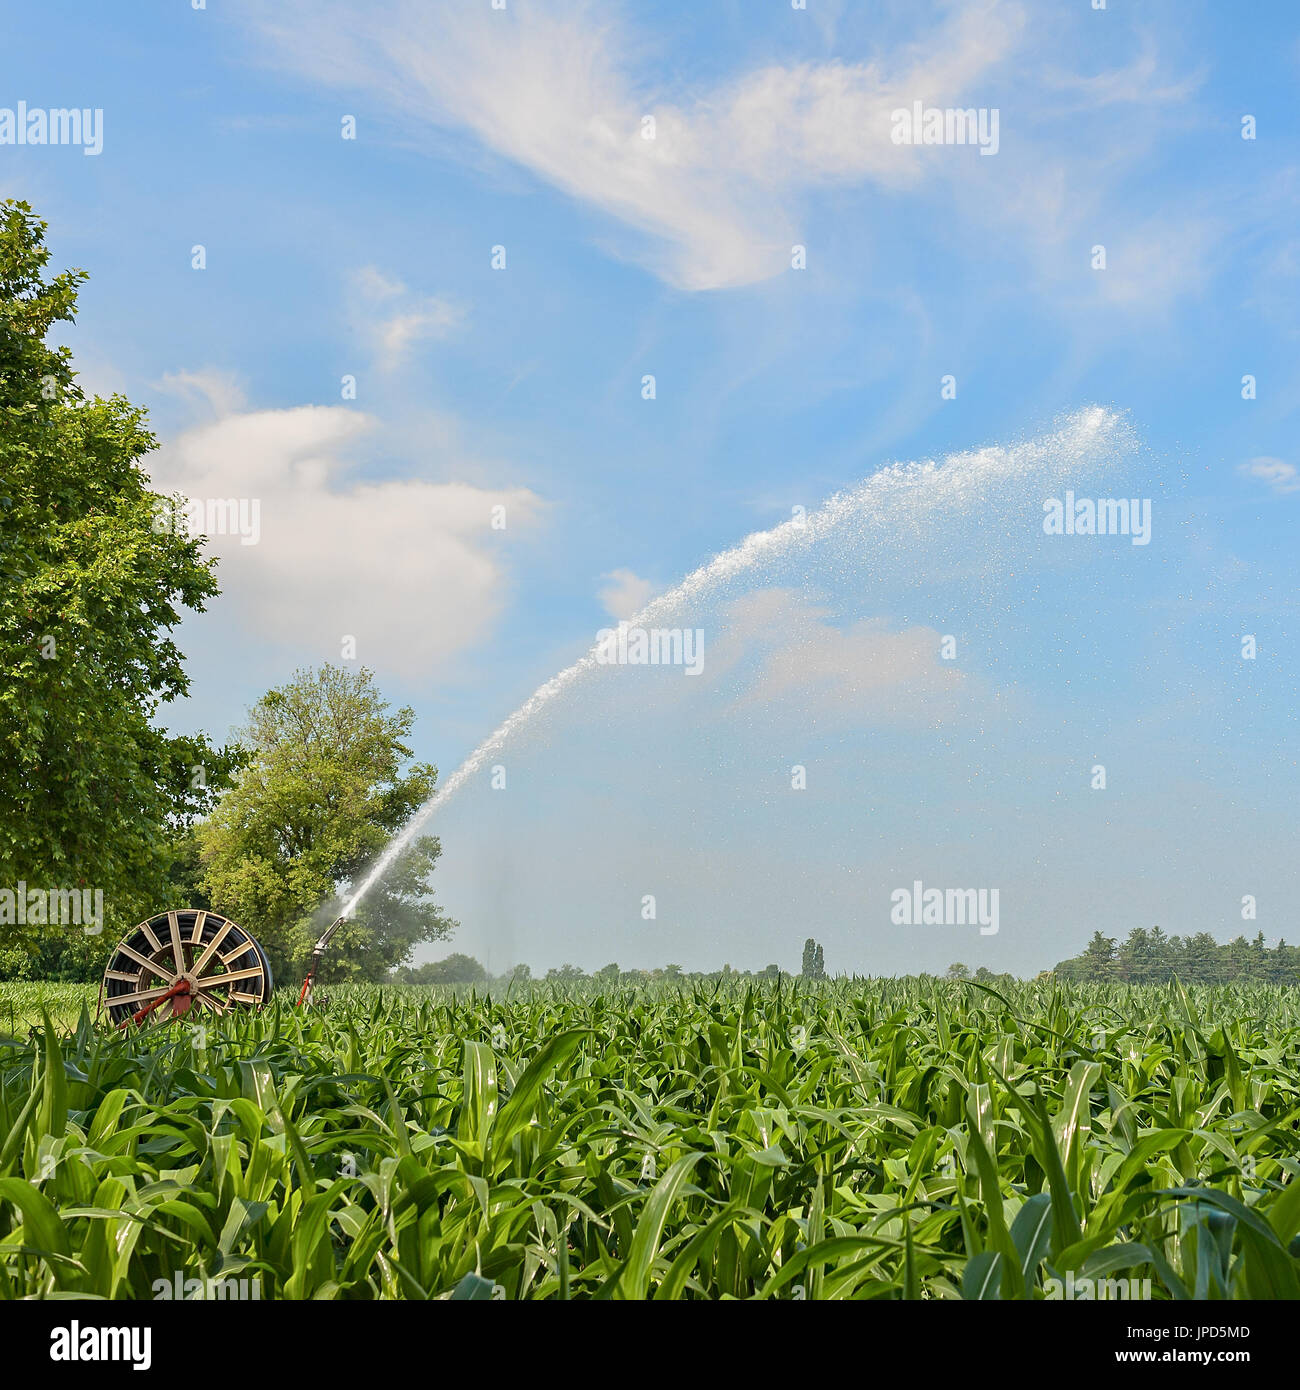 Agricultural equipment. Equipment pumping water on field of corn.Water sprinkler Stock Photo